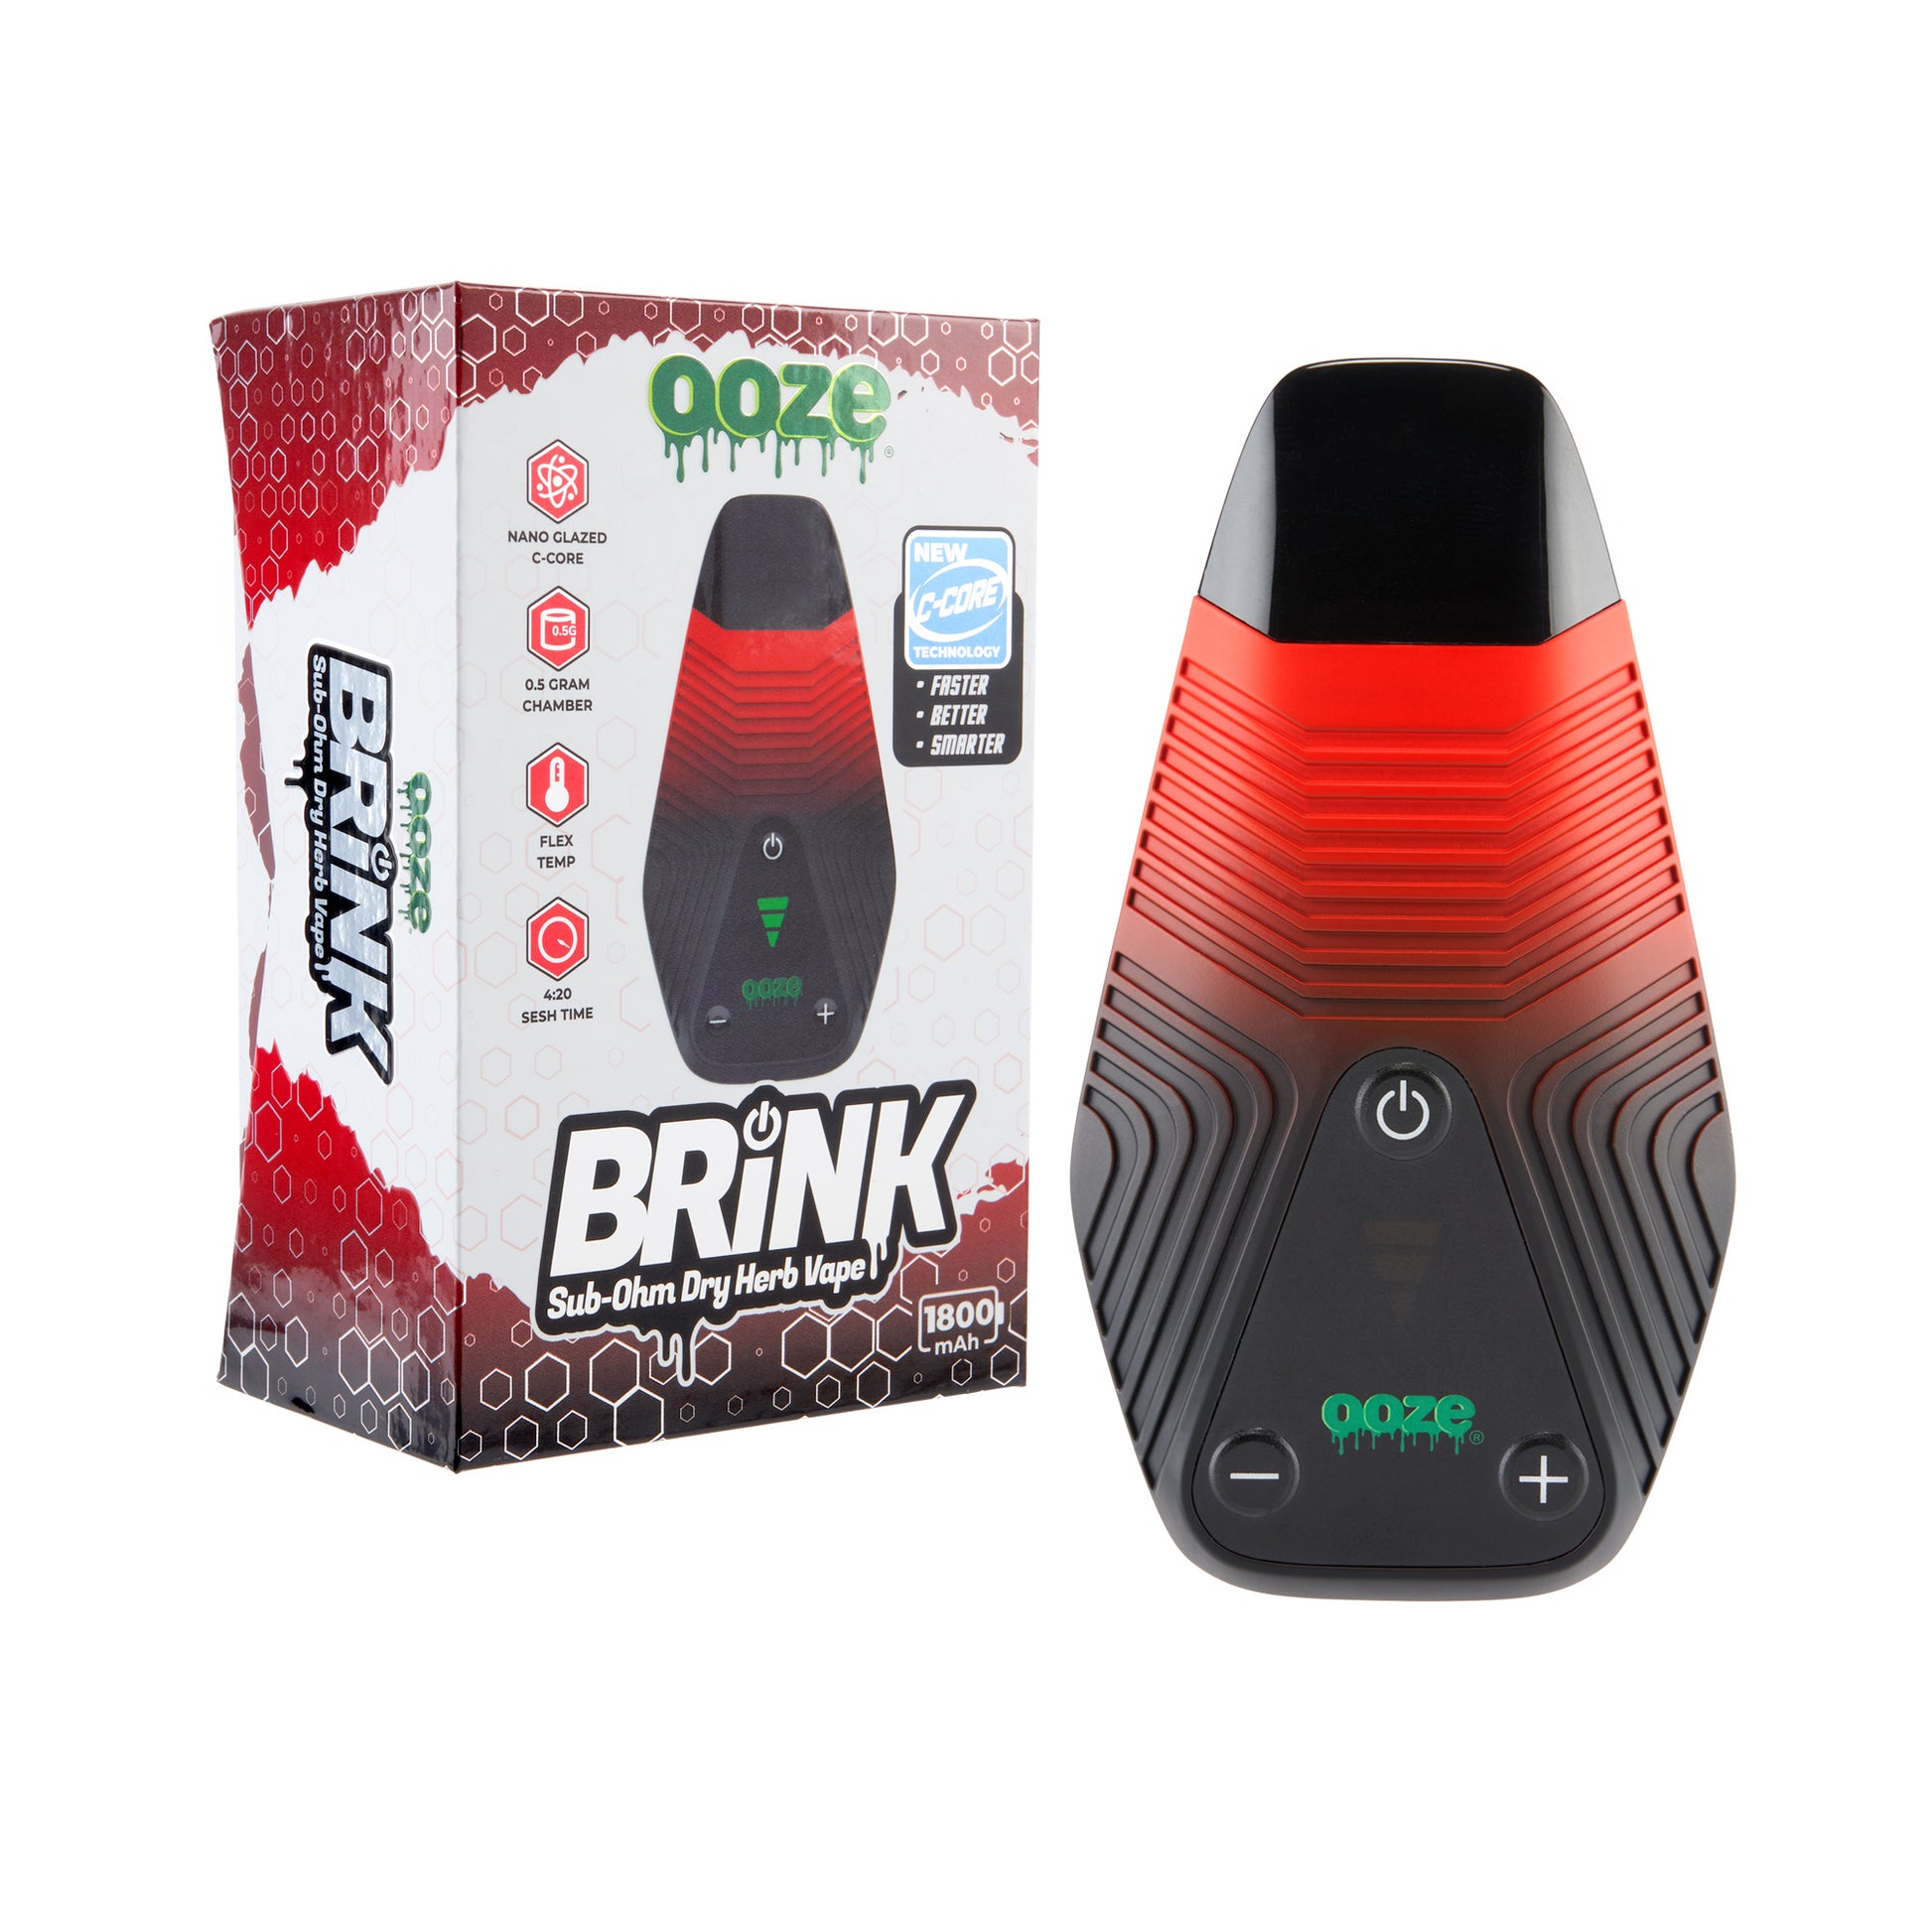 The midnight sun Ooze Brink dry herb vape is shown next to the box